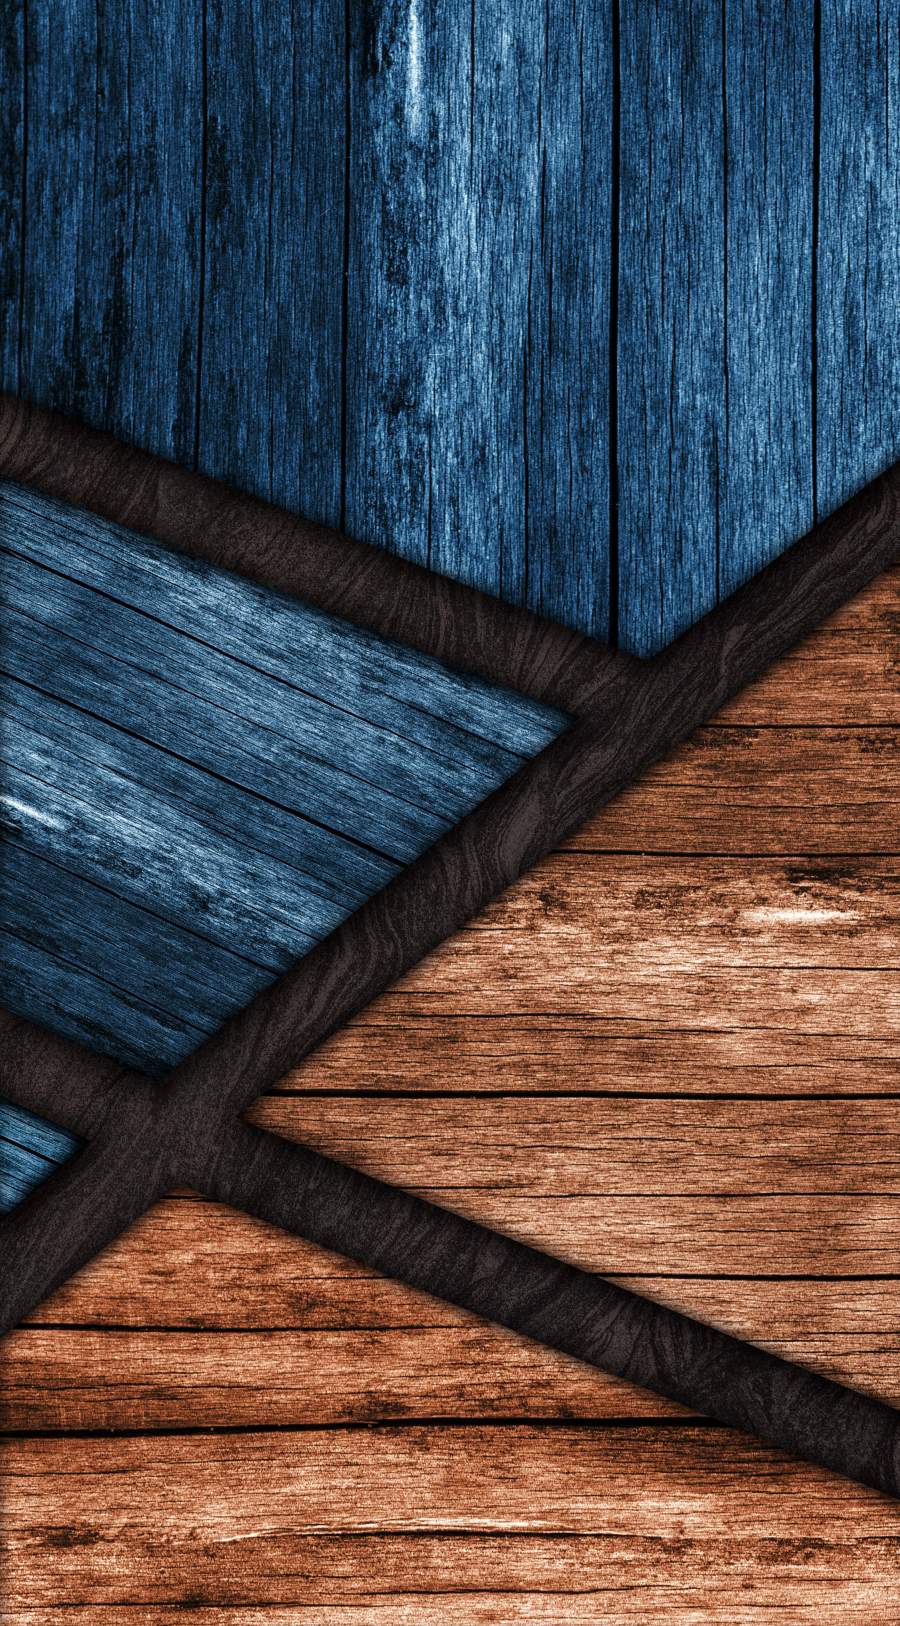 iPhone 5 Wallpaper  Wood Only  MacRumors Forums